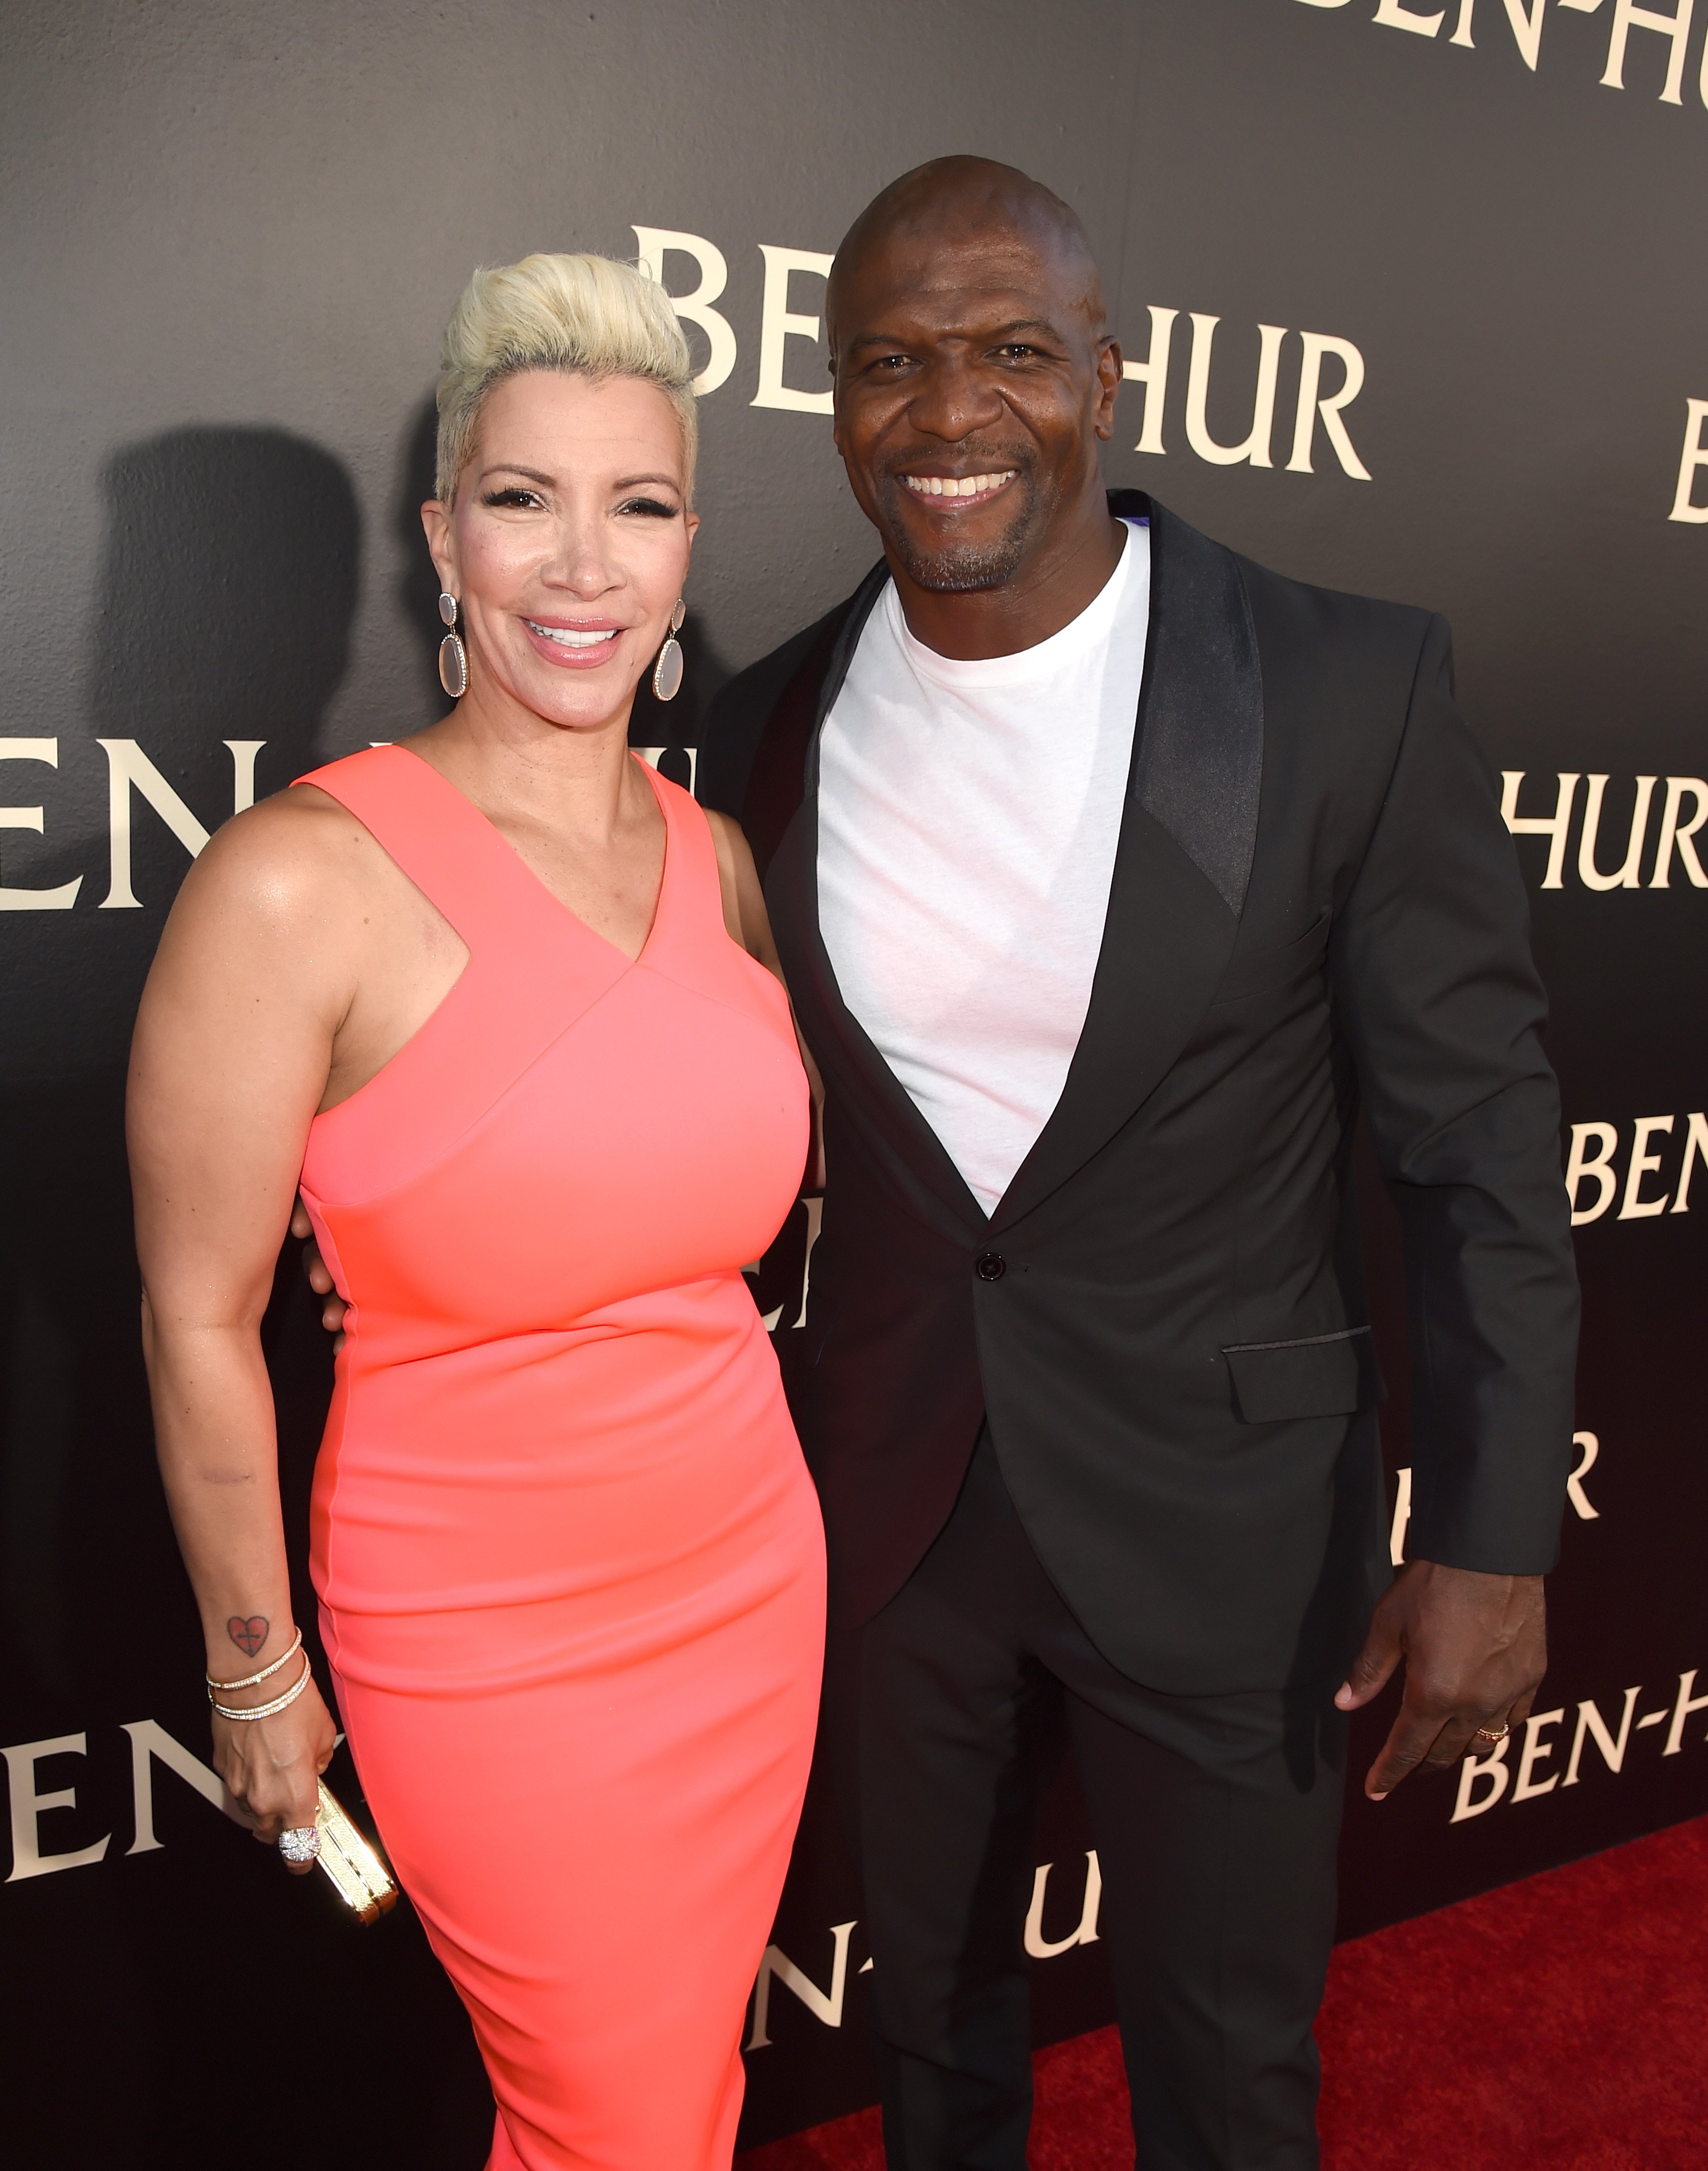 Terry Crews and his wife Rebecca King-Crews at the premiere of Paramount Pictures' "Ben-Hur" at the Chinese Theatre on August 16, 2016 | Photo: Getty Images